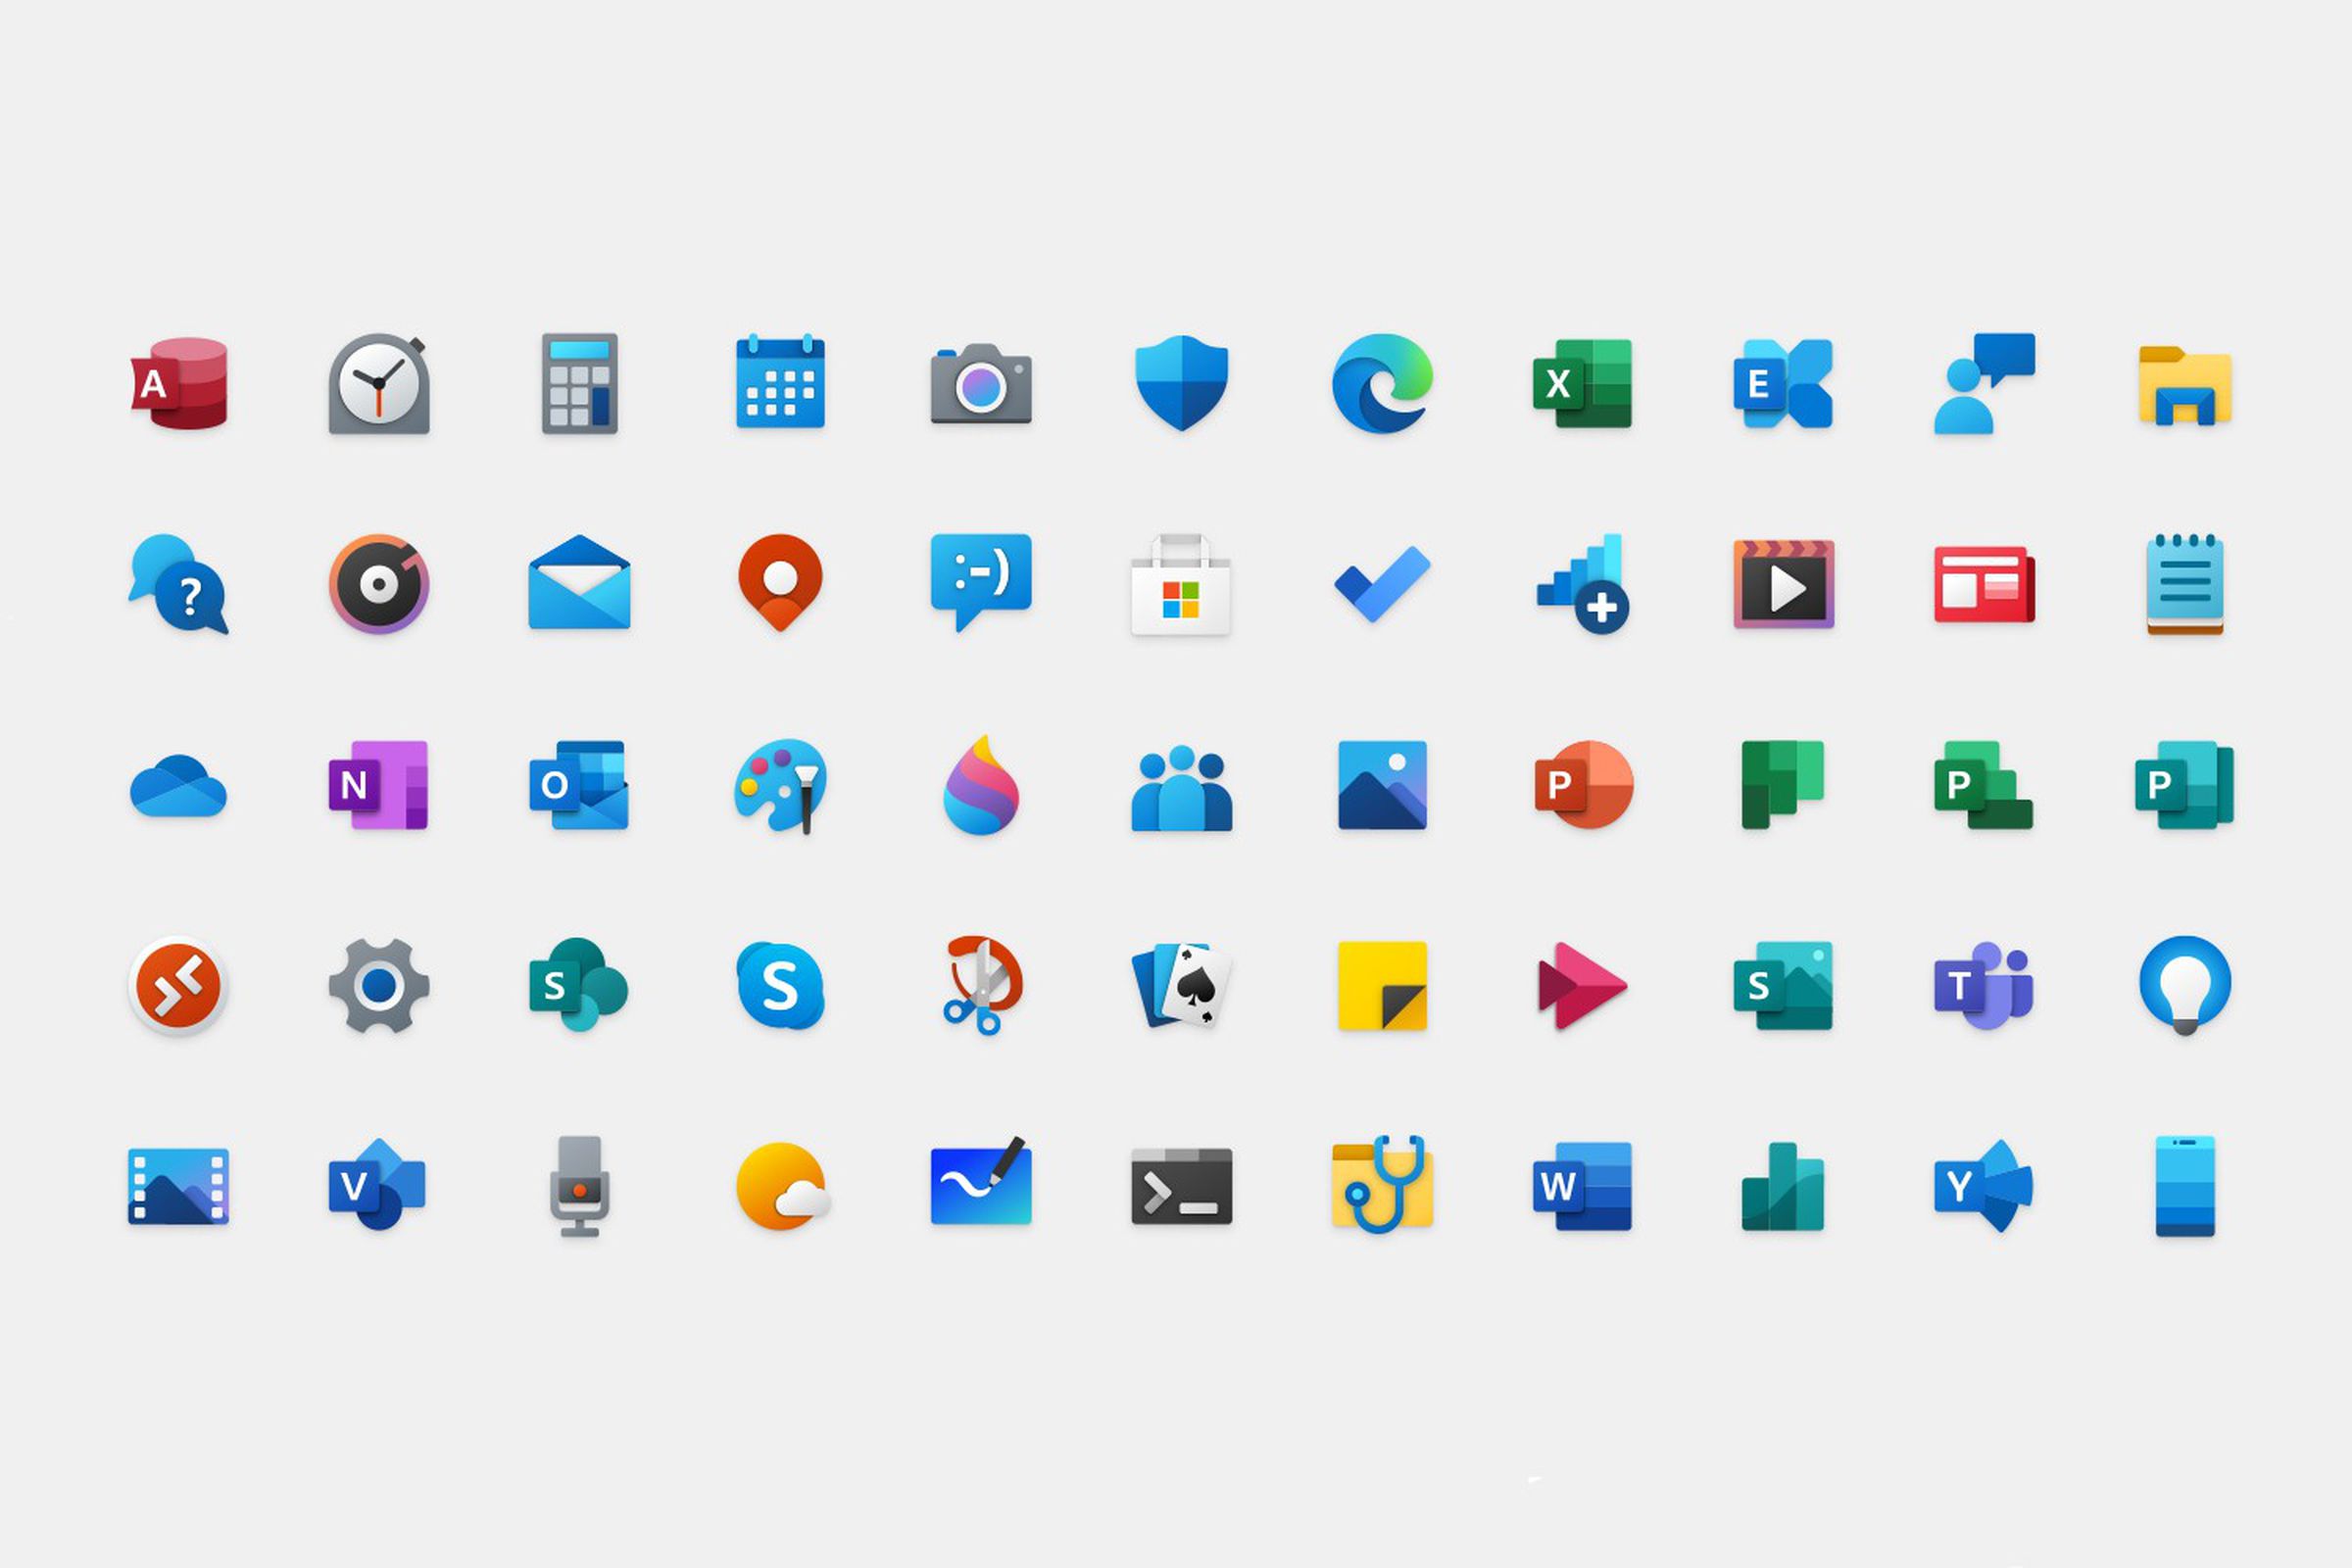 The new Windows 10 icons.